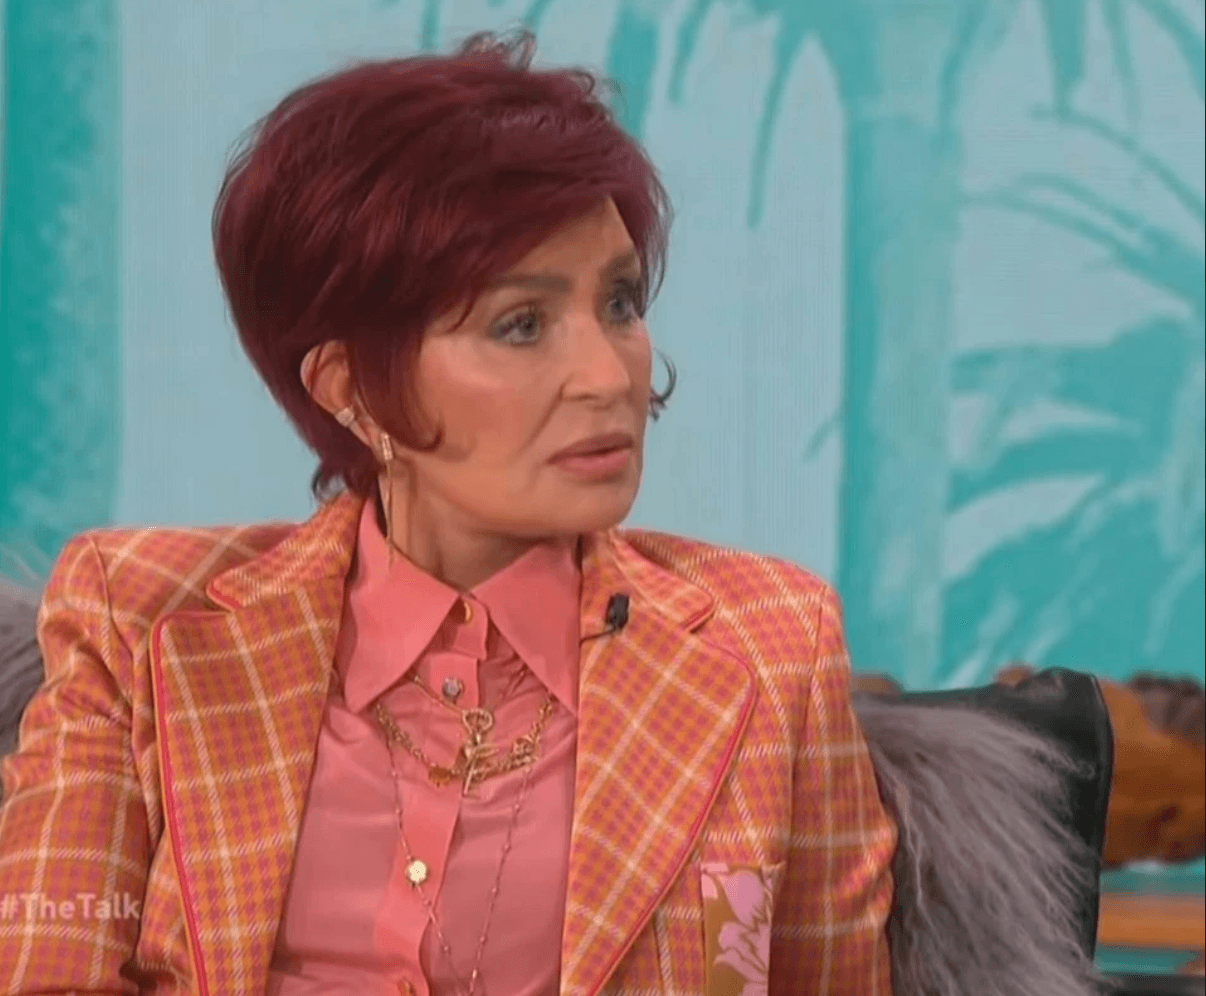 Sharon Osbourne Suing CBS After Being Forced To Quit ‘The Talk’